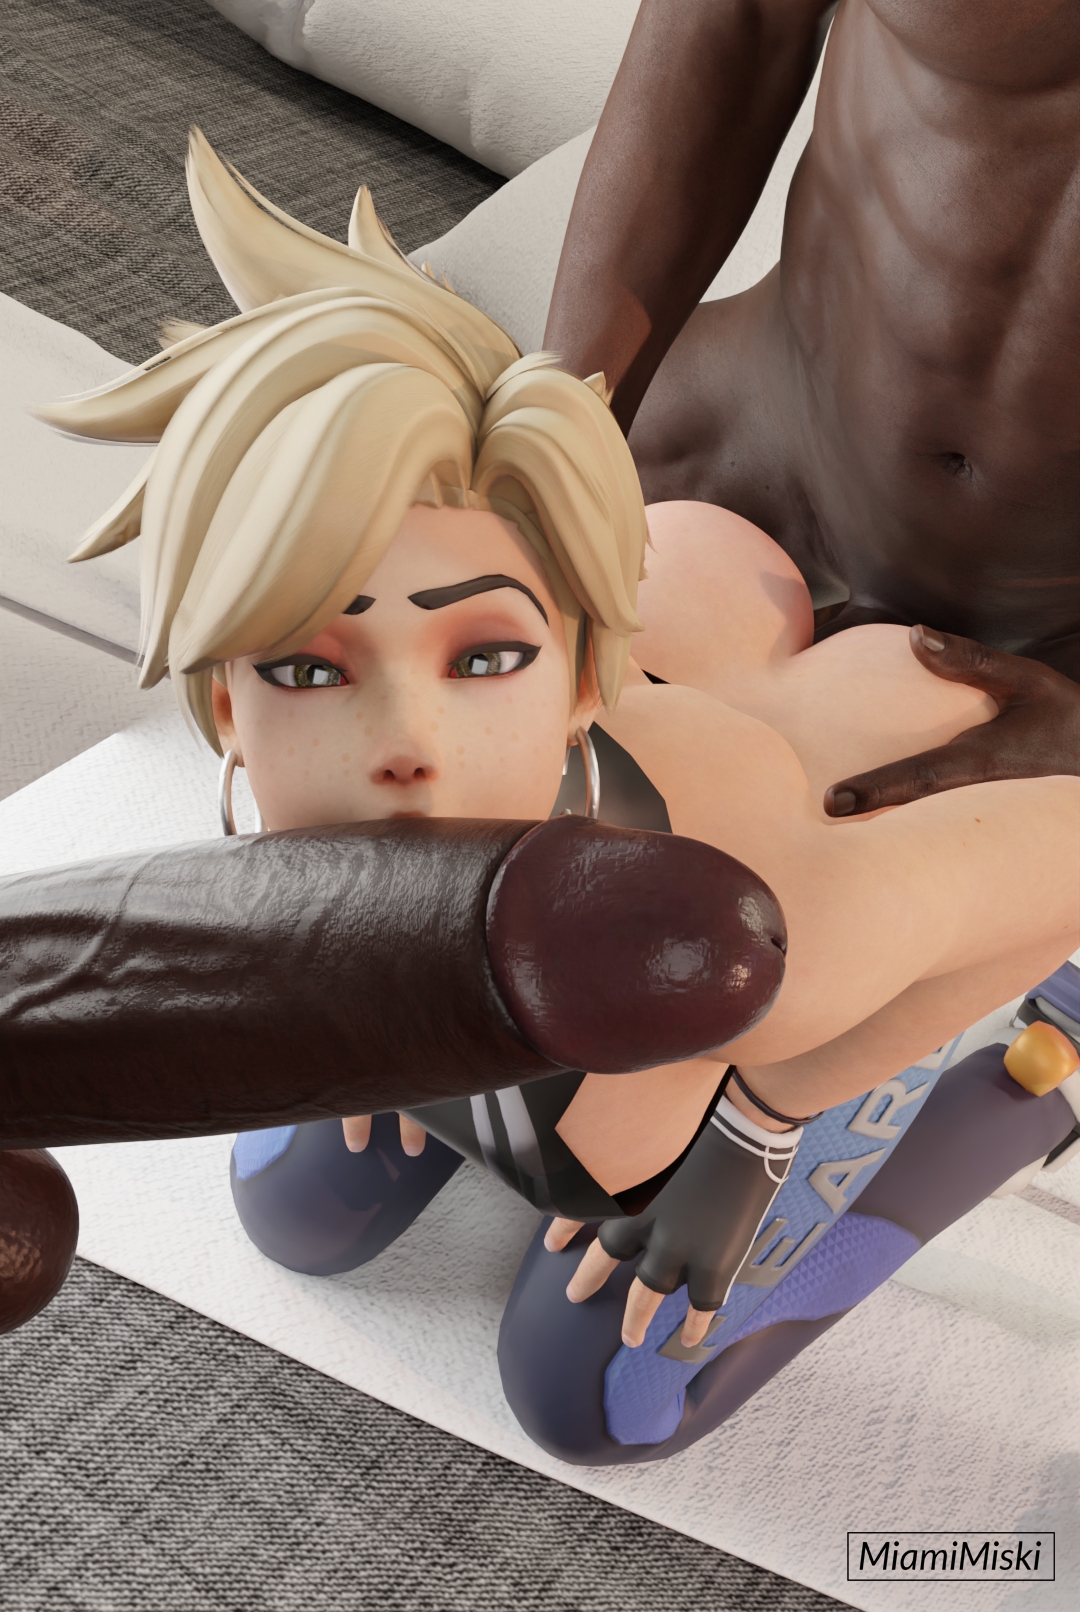 Tracer back at it again with that amazing BBC spit roast